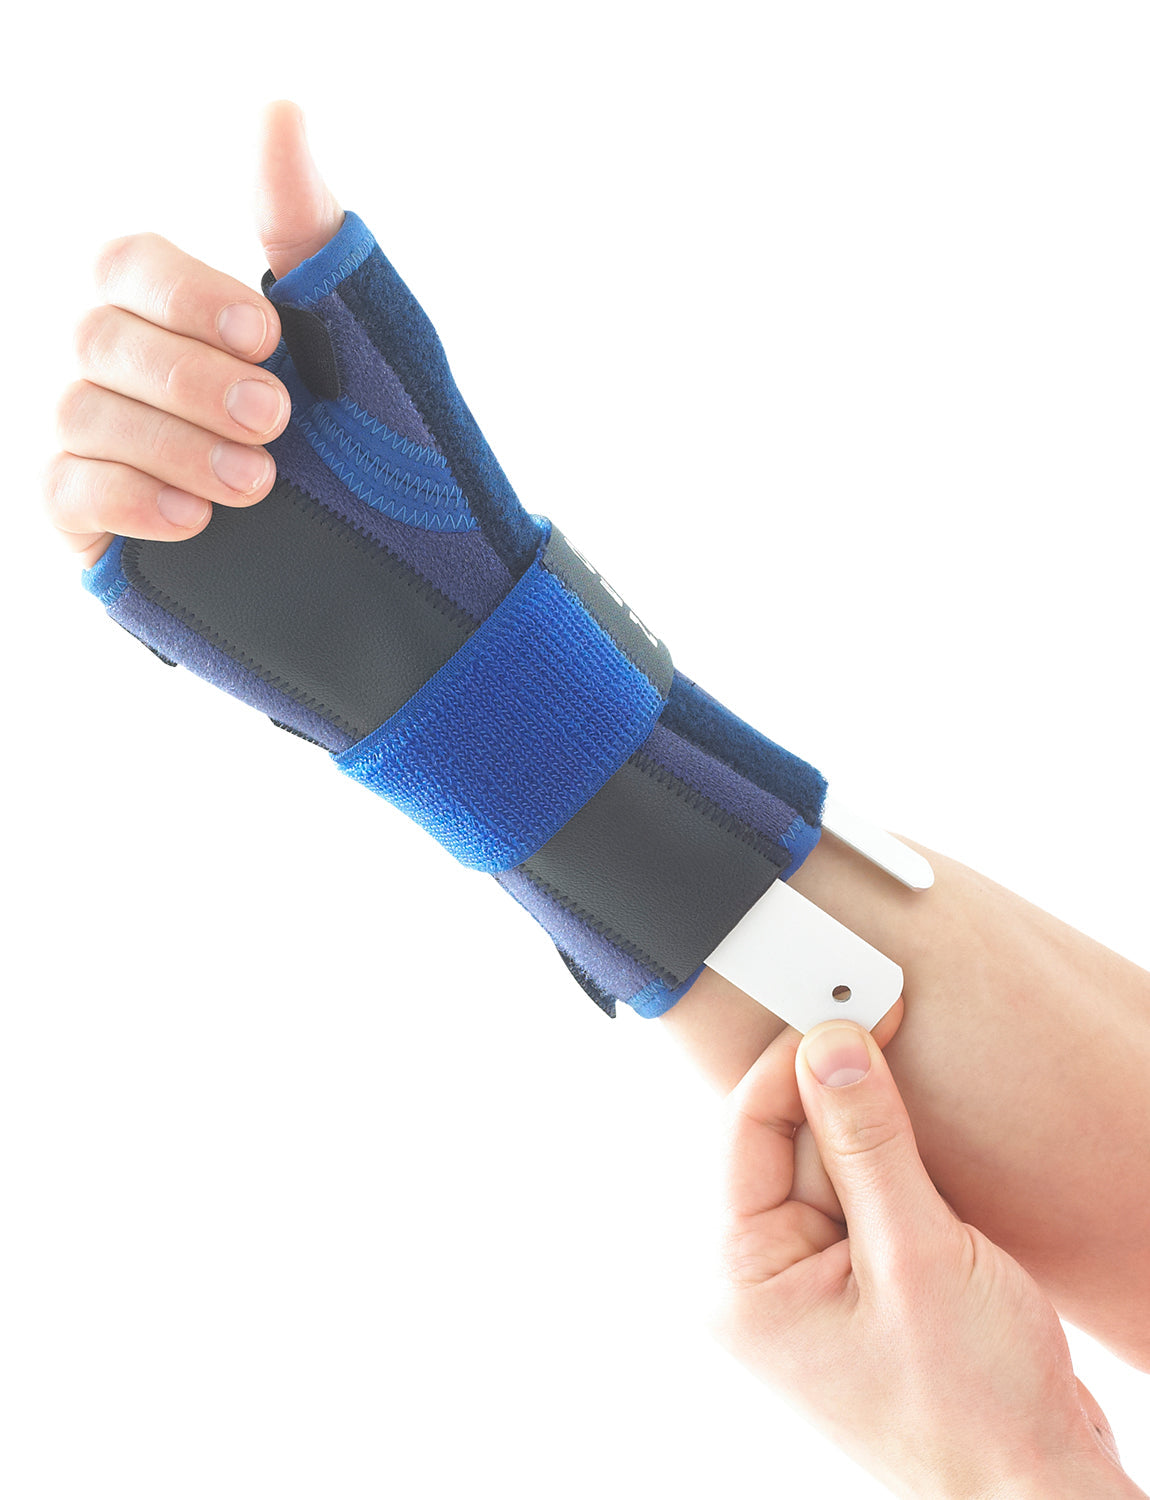 Walgreens Elbow Sleeve with Variable Compression S/M